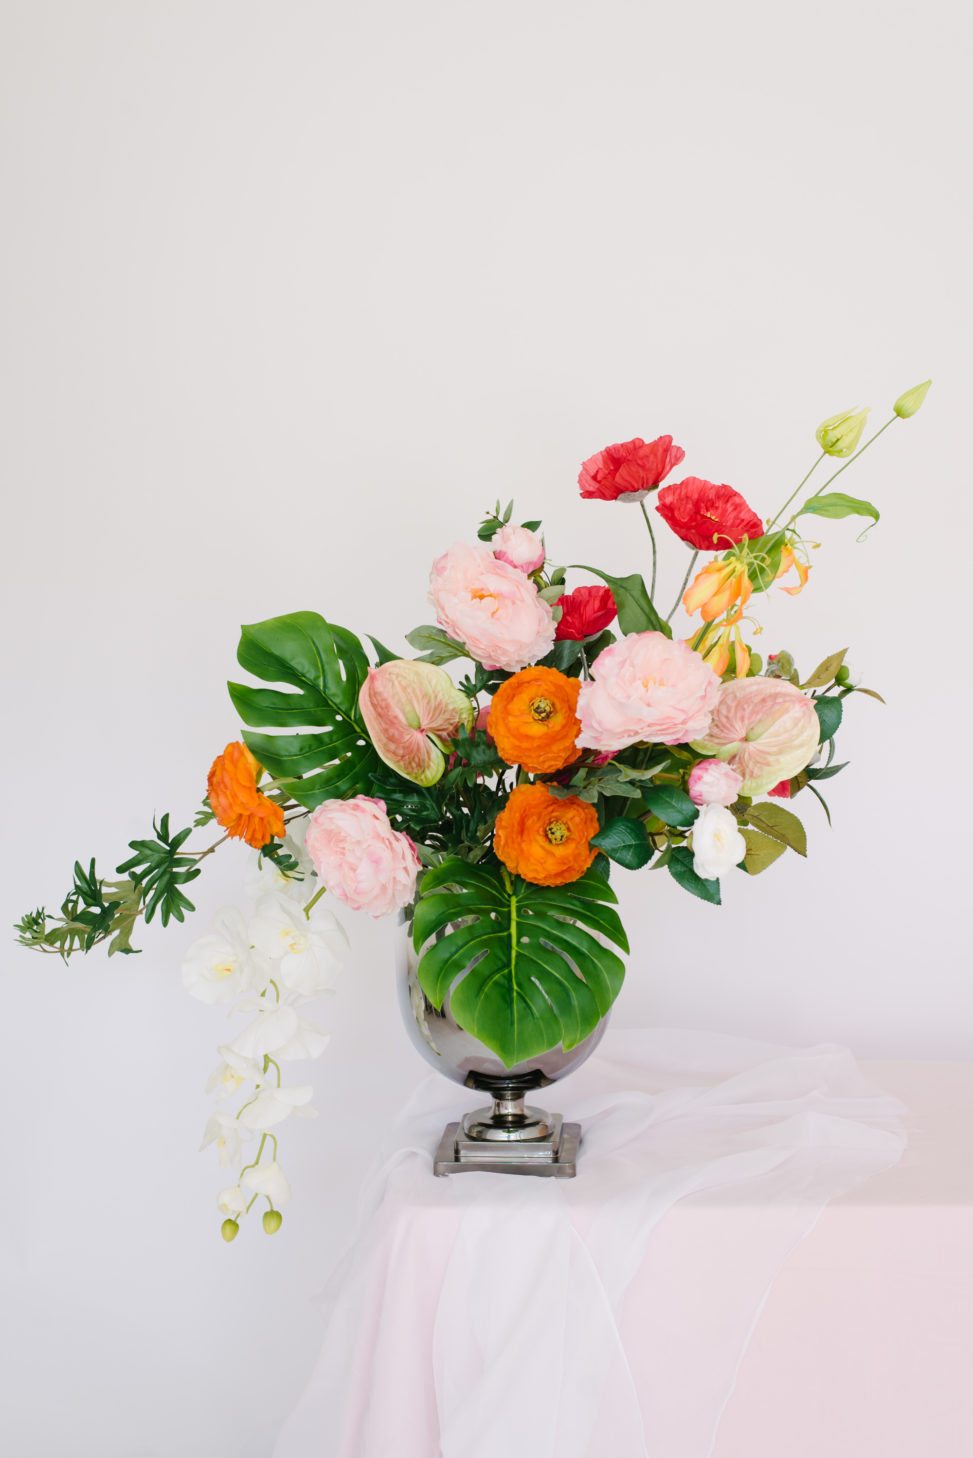 vase with fake floral red, pink, and orange bouquet that looks real on white background